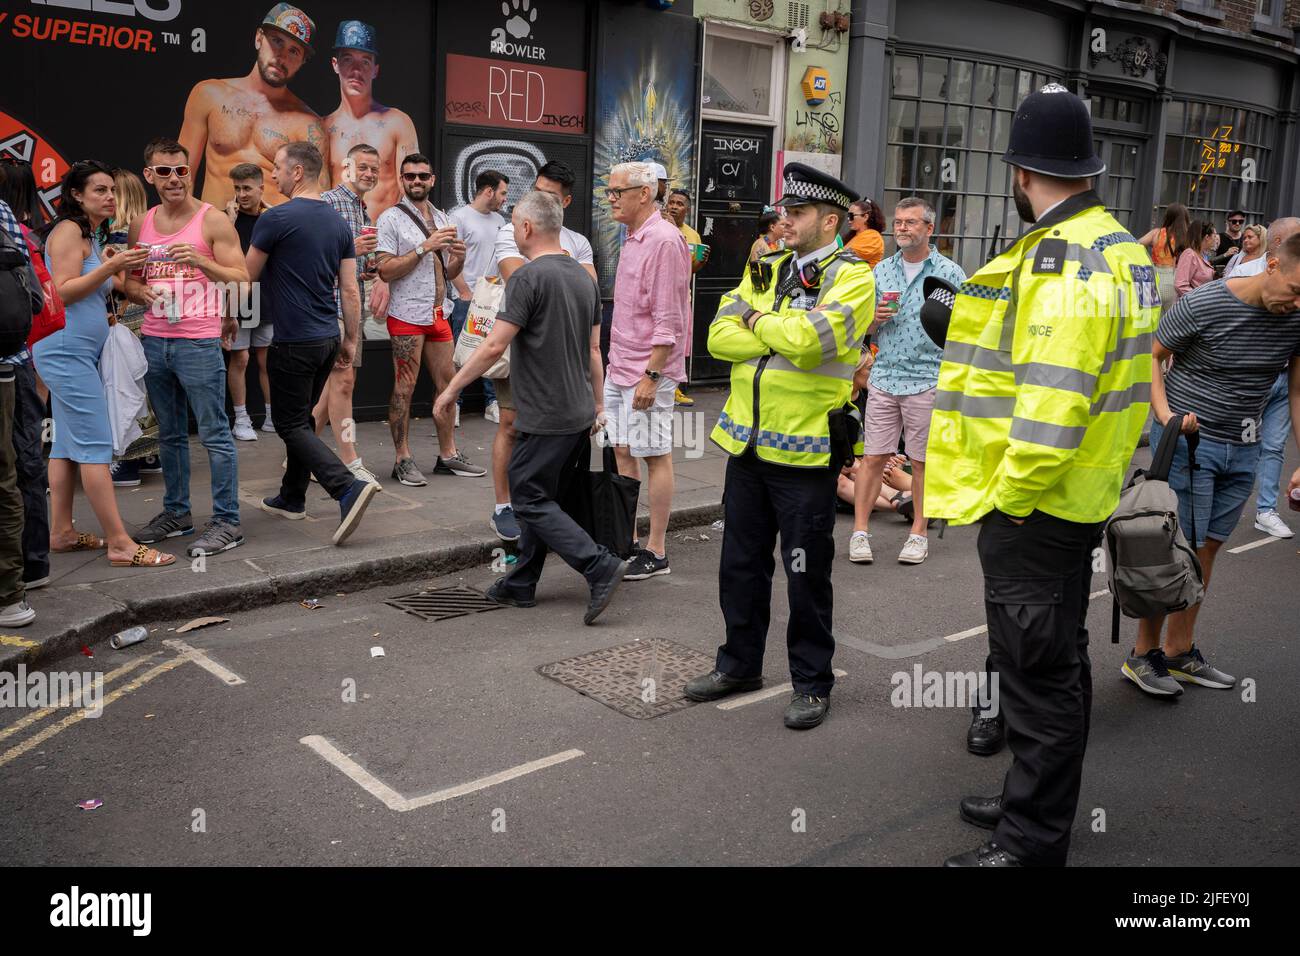 Wearing uniforms, Met police officers watch members of the LGBTQ+ community gather in Soho streets during the 50th Gay Pride celebrations, on 2nd July 2022, in London, England. Stock Photo